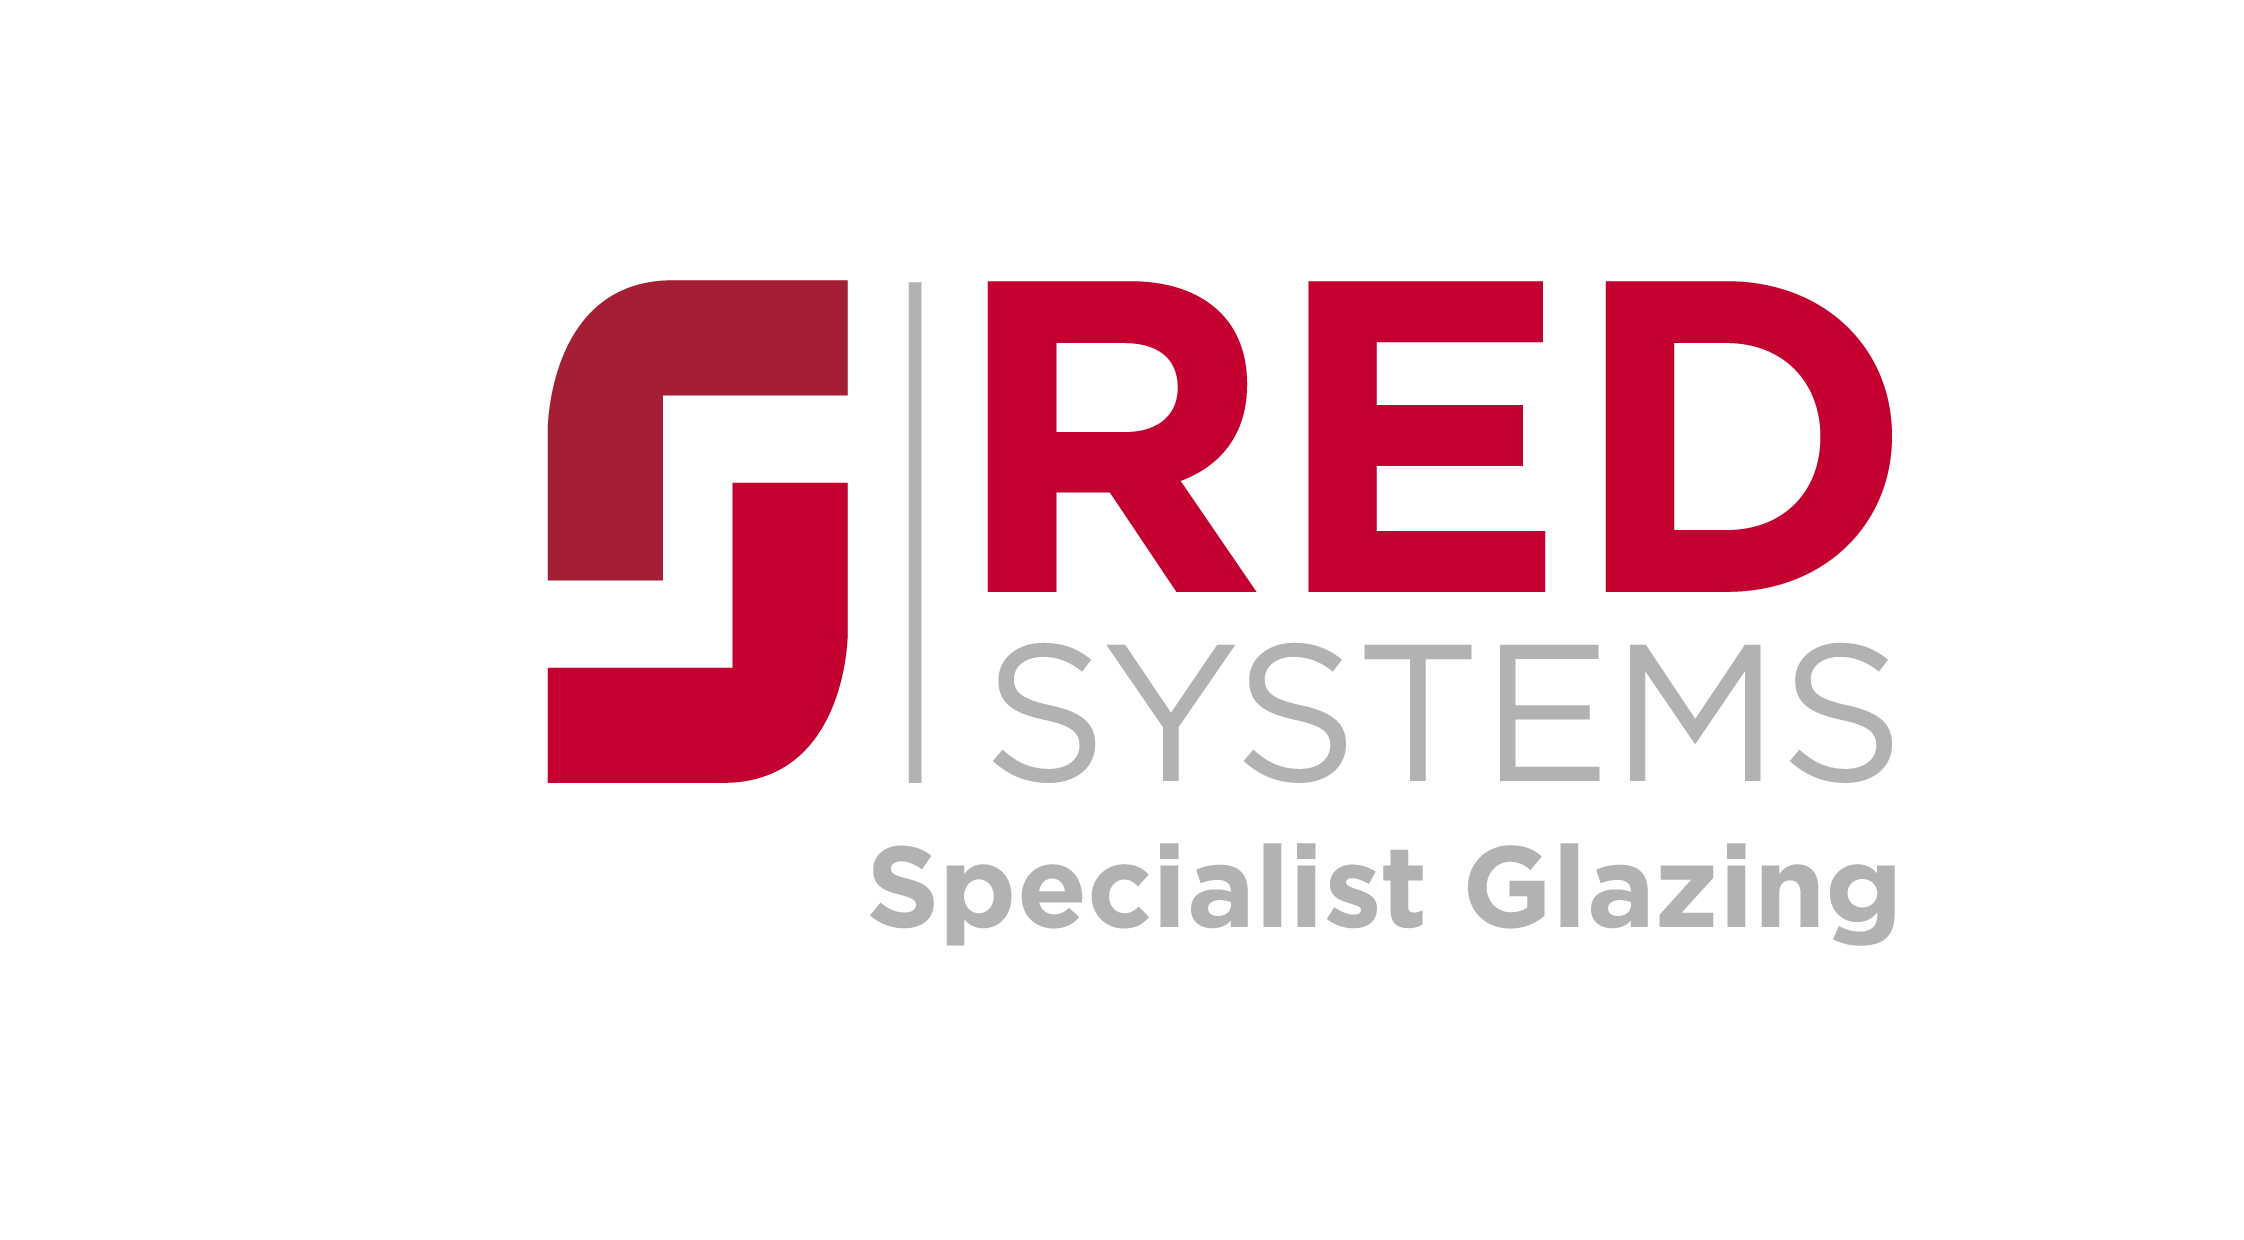 RED Systems Ltd